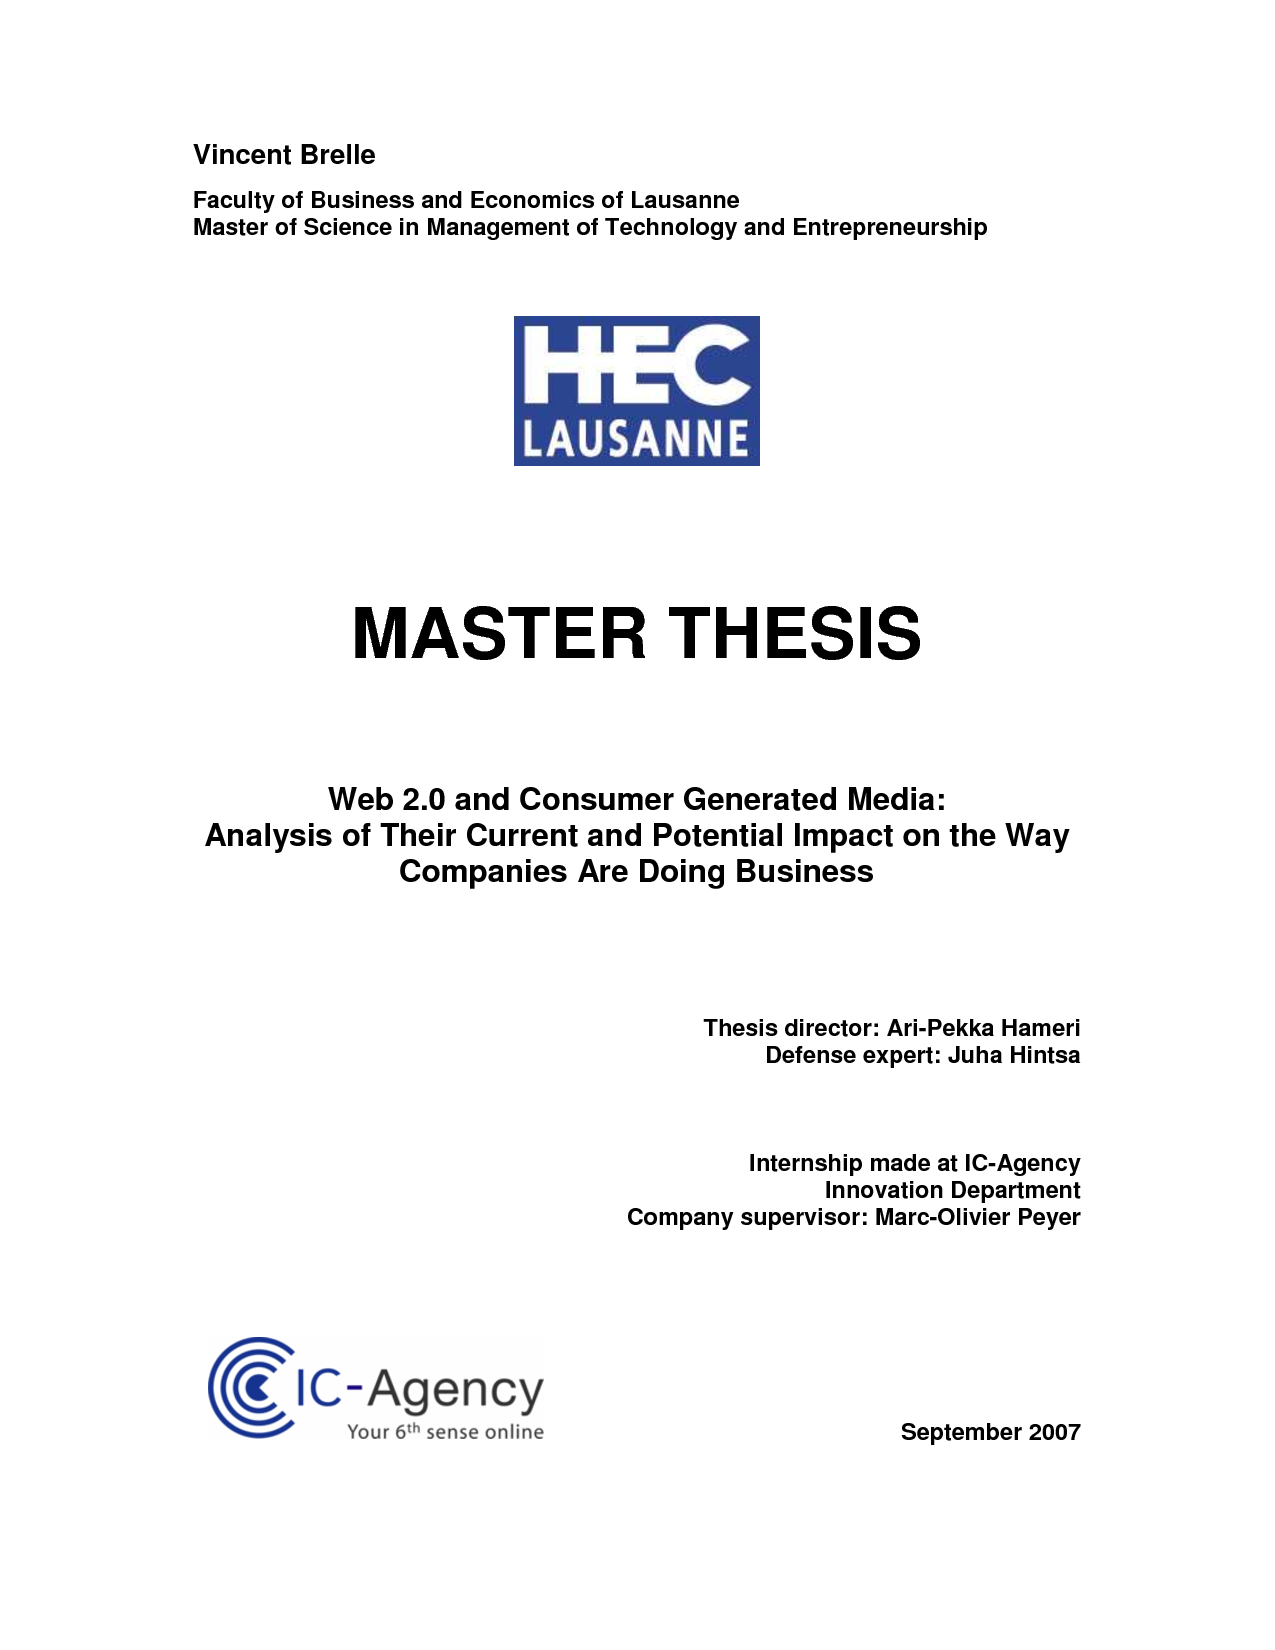 Cover sheet master thesis sample